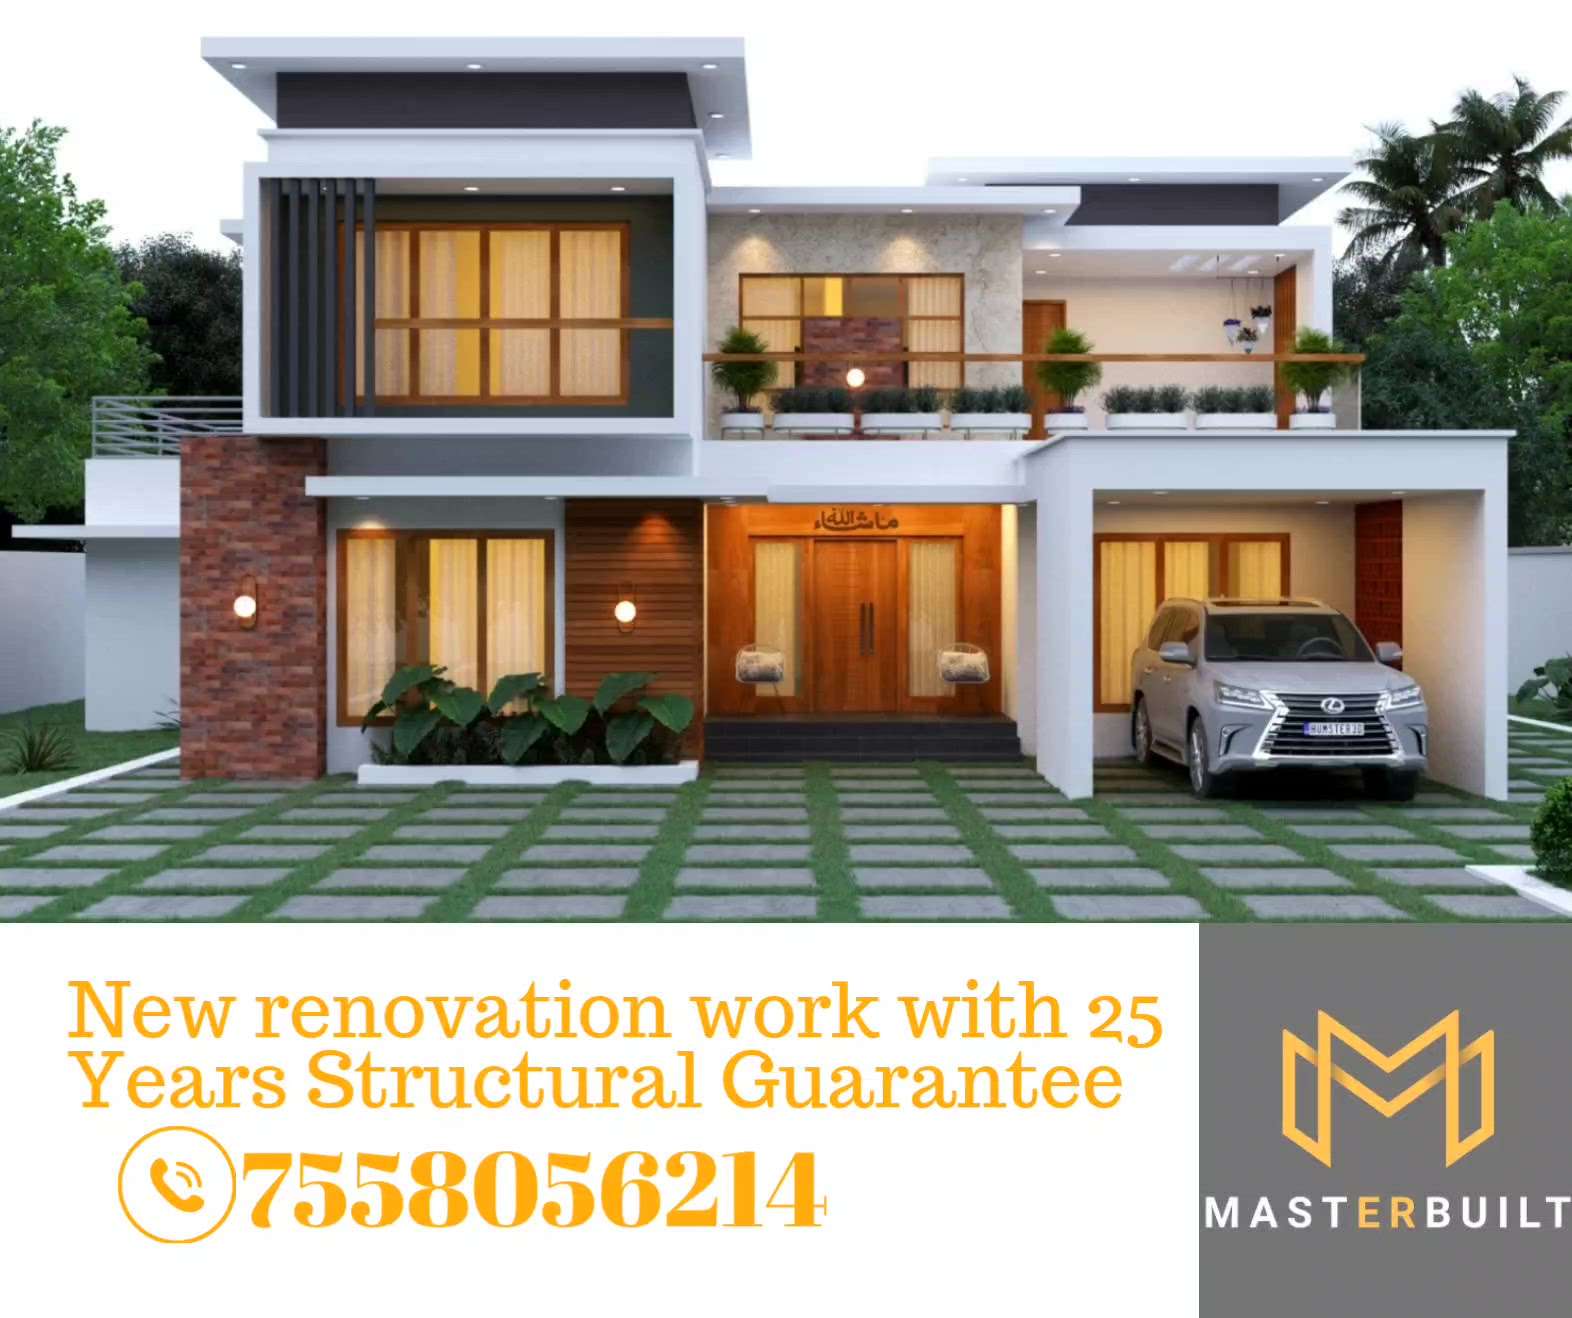 Renovation work for a Client at Mullassery, Thrissur
Total Estimate : 25 Lakhs
Extension area 1200 Sqft #Masterbuilt  #HouseRenovation